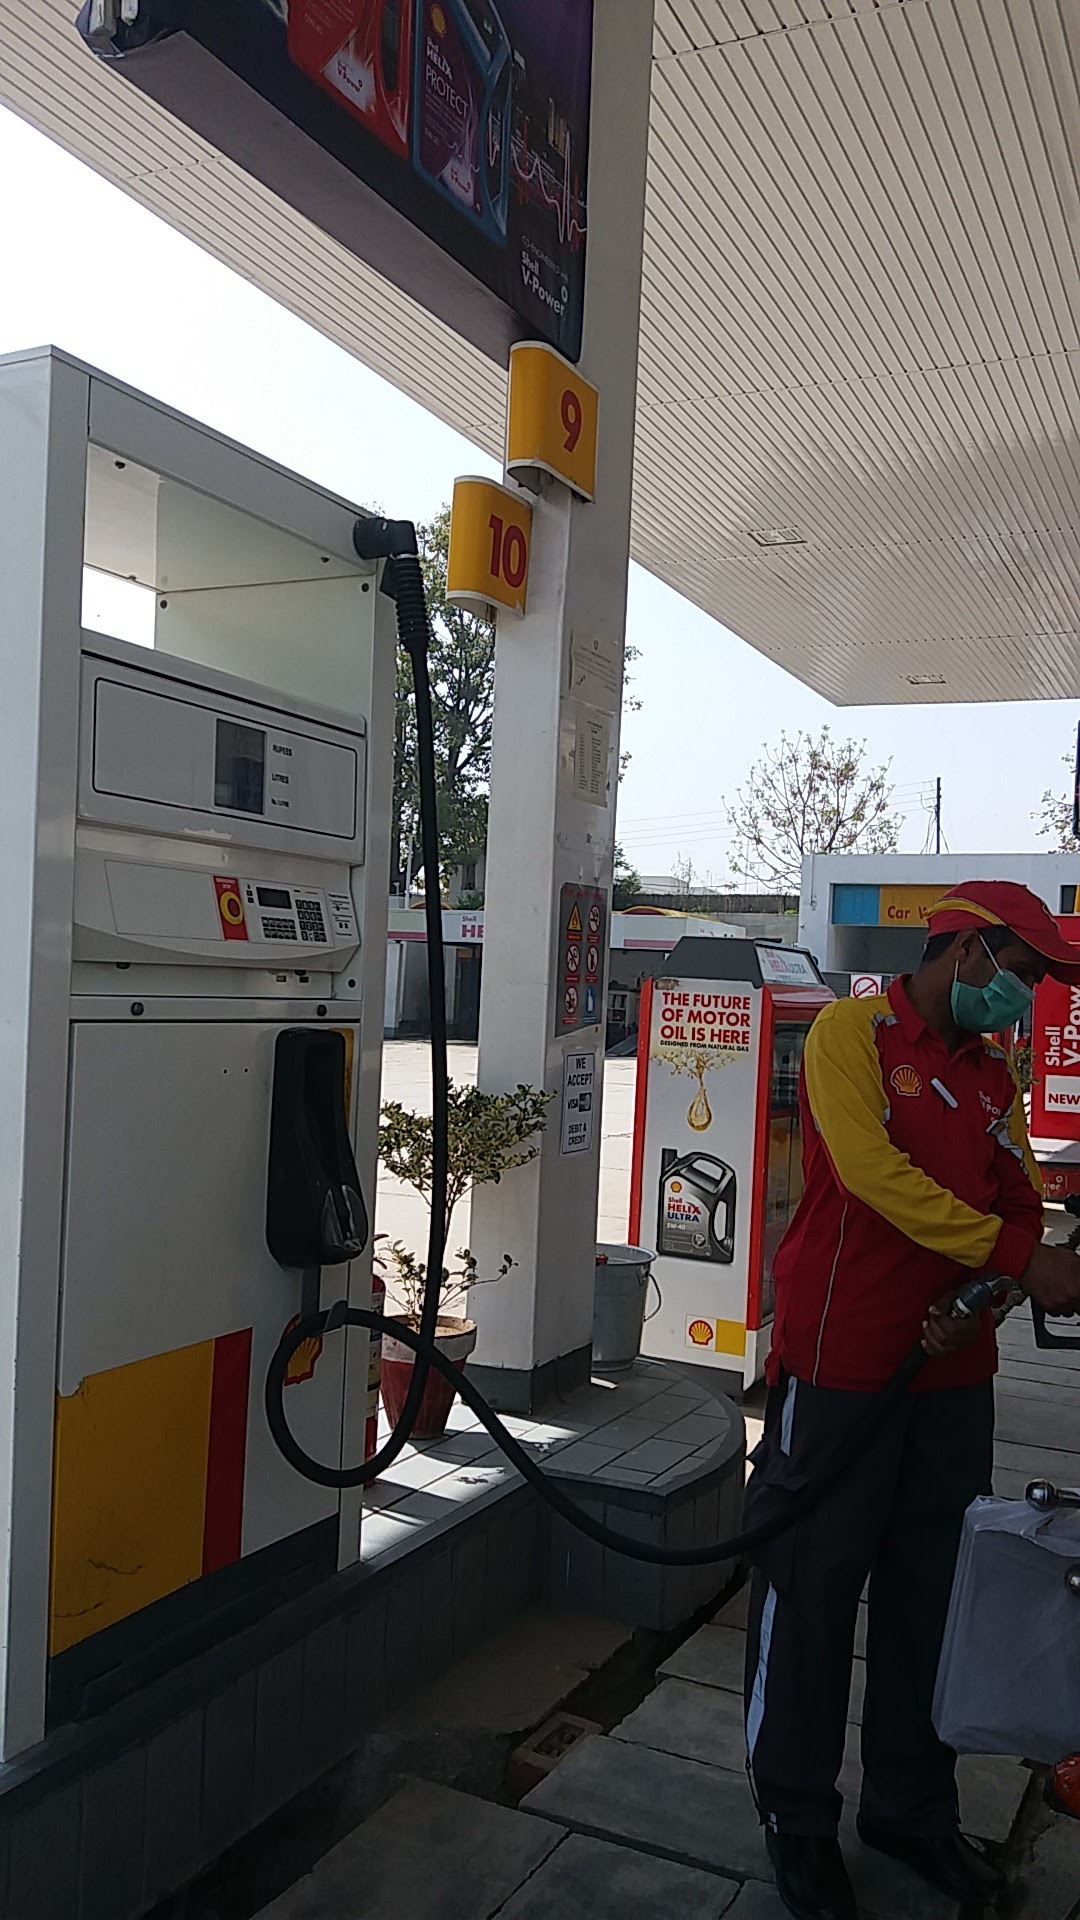 Shell Petrol Station & CNG filling